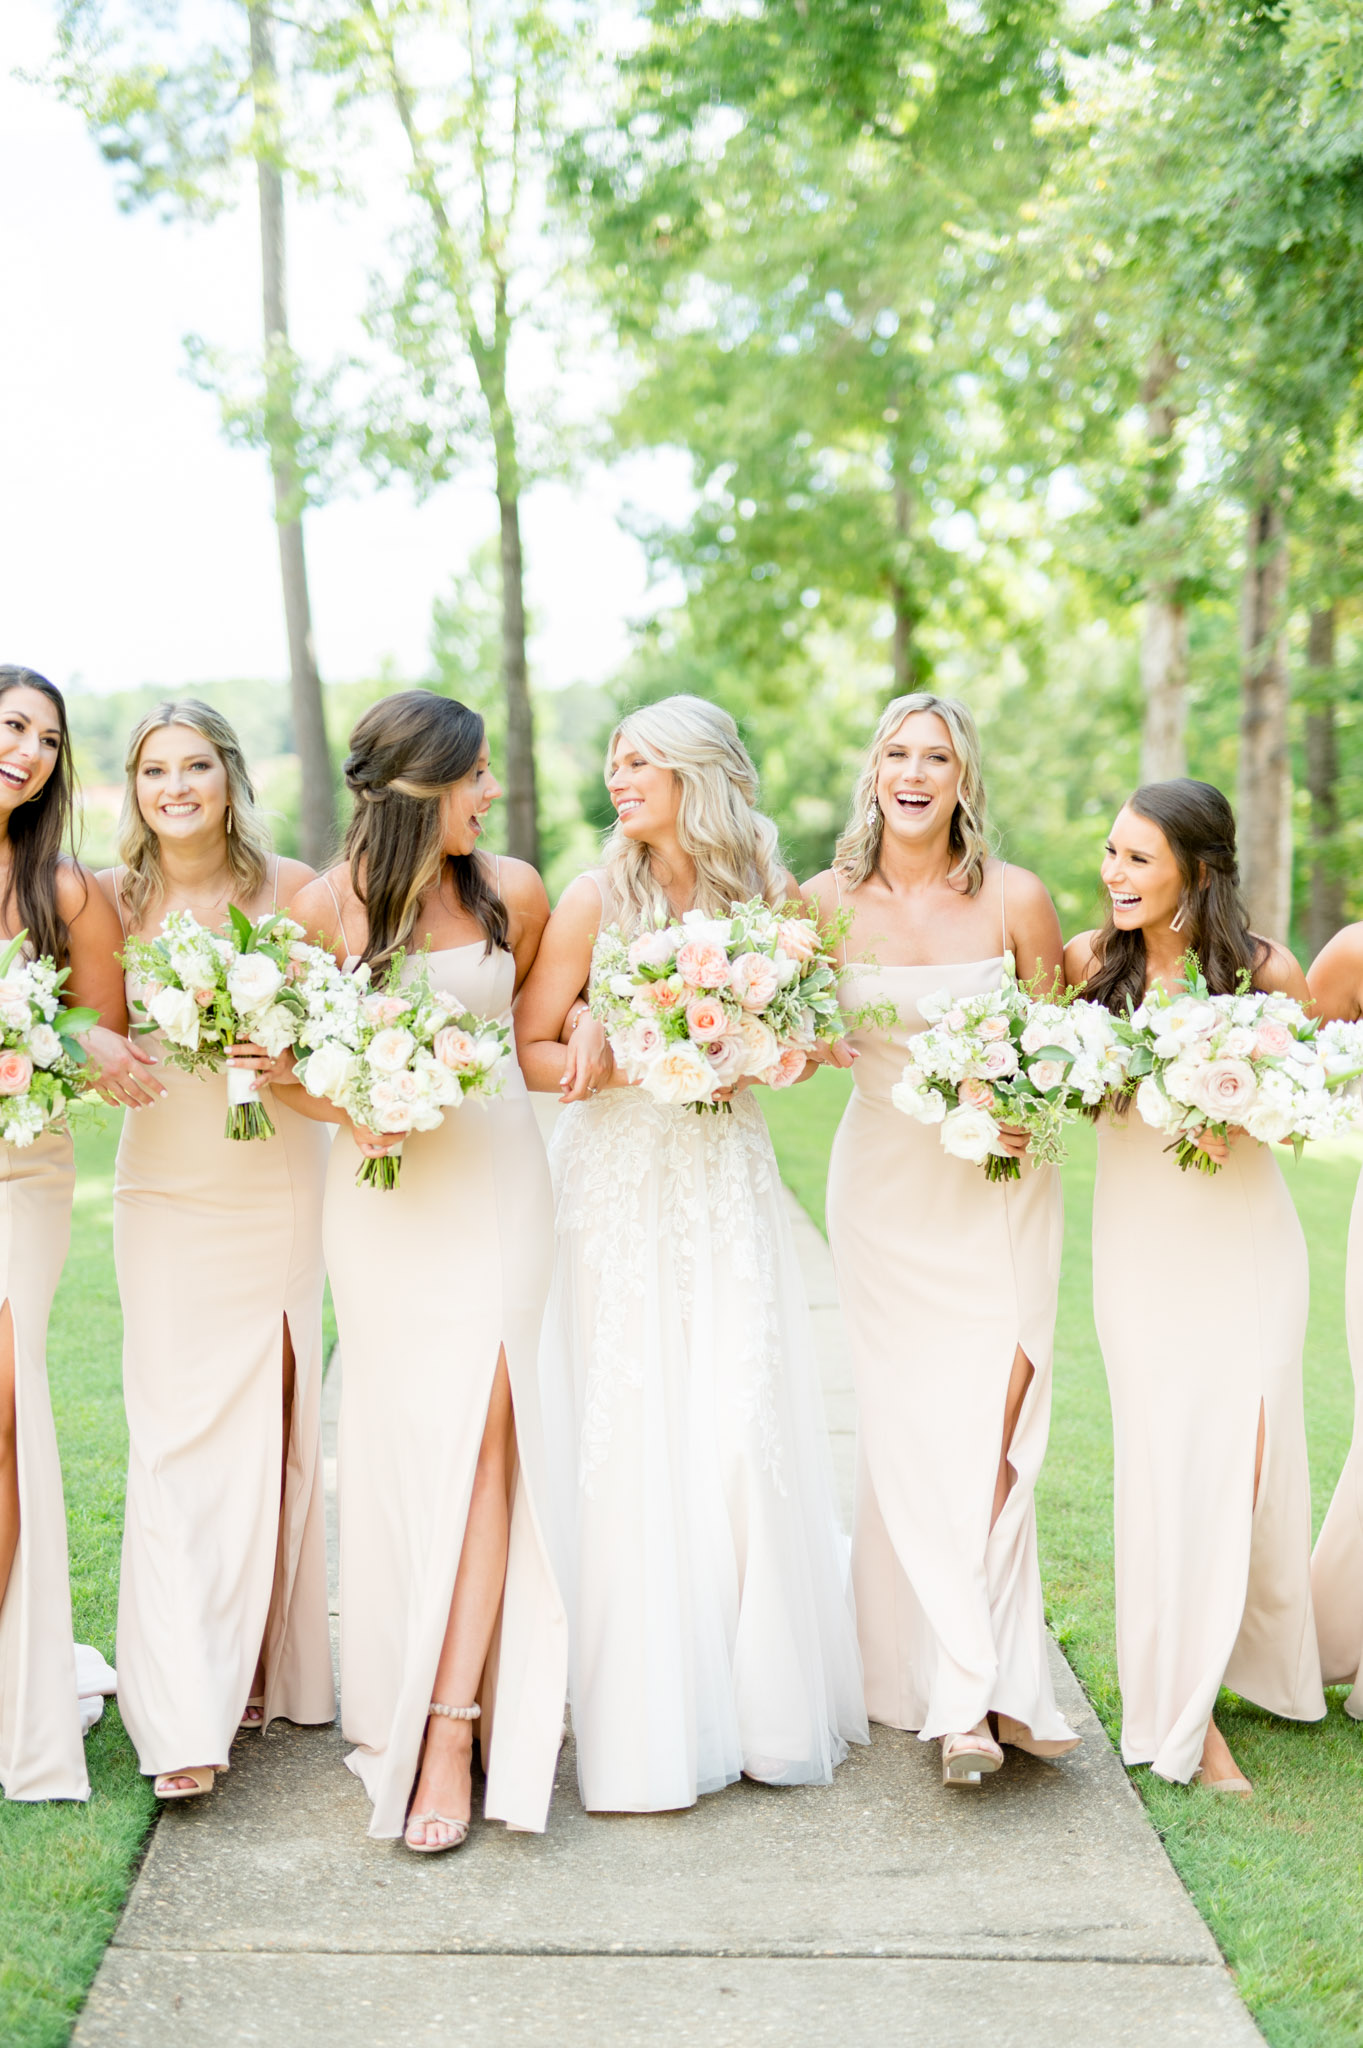 Bride laughs with bridesmaids as they walk.